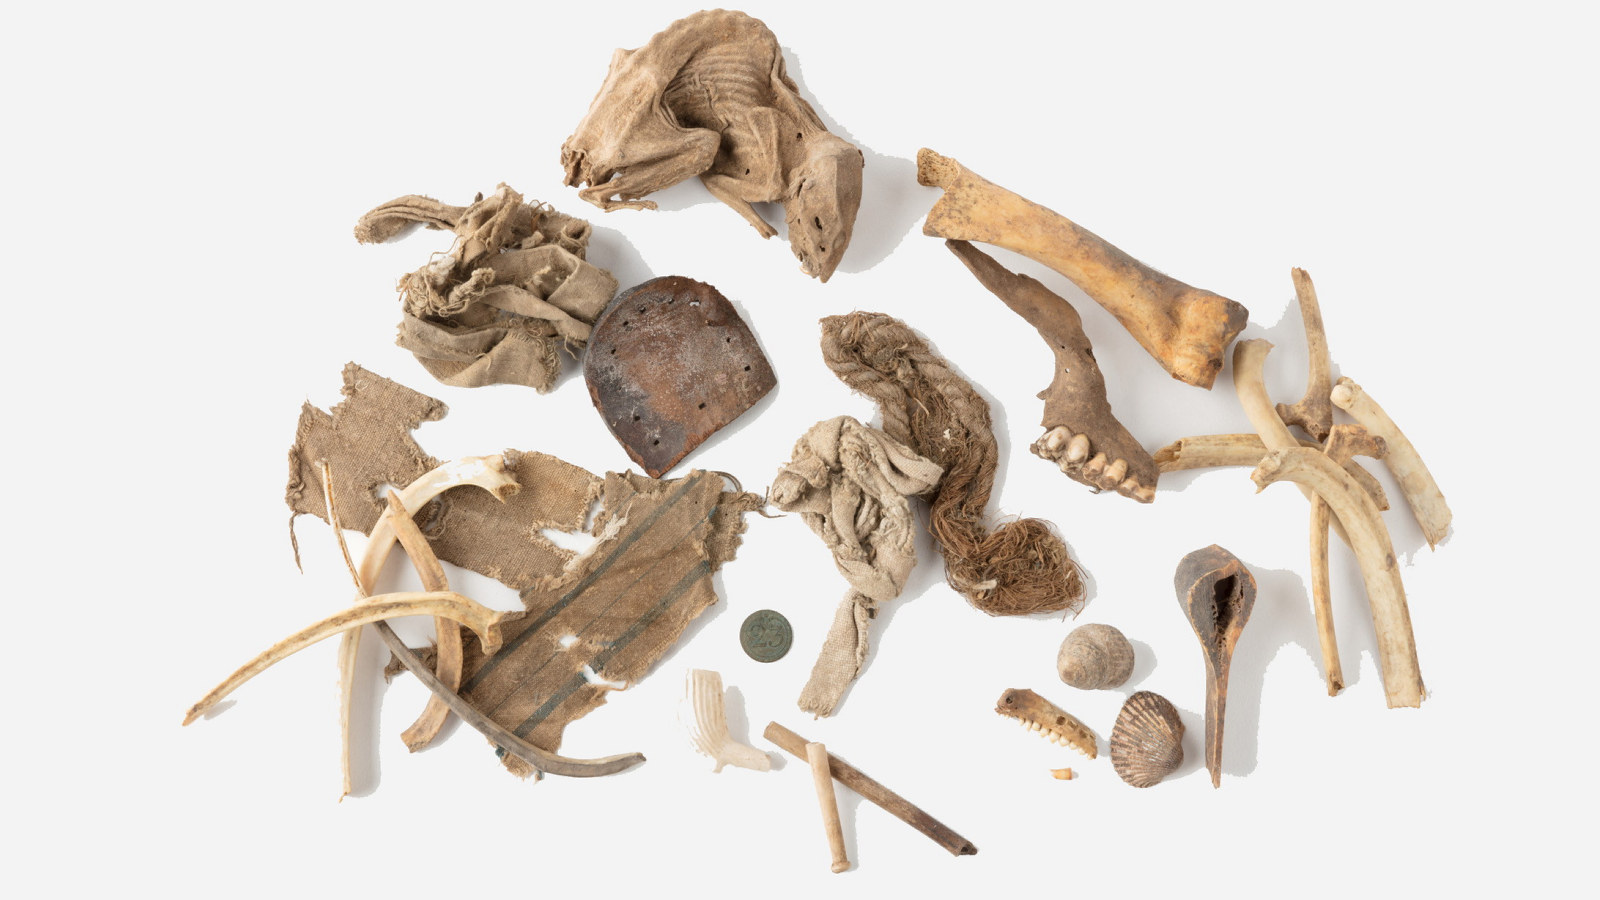 Assorted fragments of cloth, bones, teeth, pipes, a rat, shells, rope and a coin found under the floor at Hyde Park Barracks during the Convict period